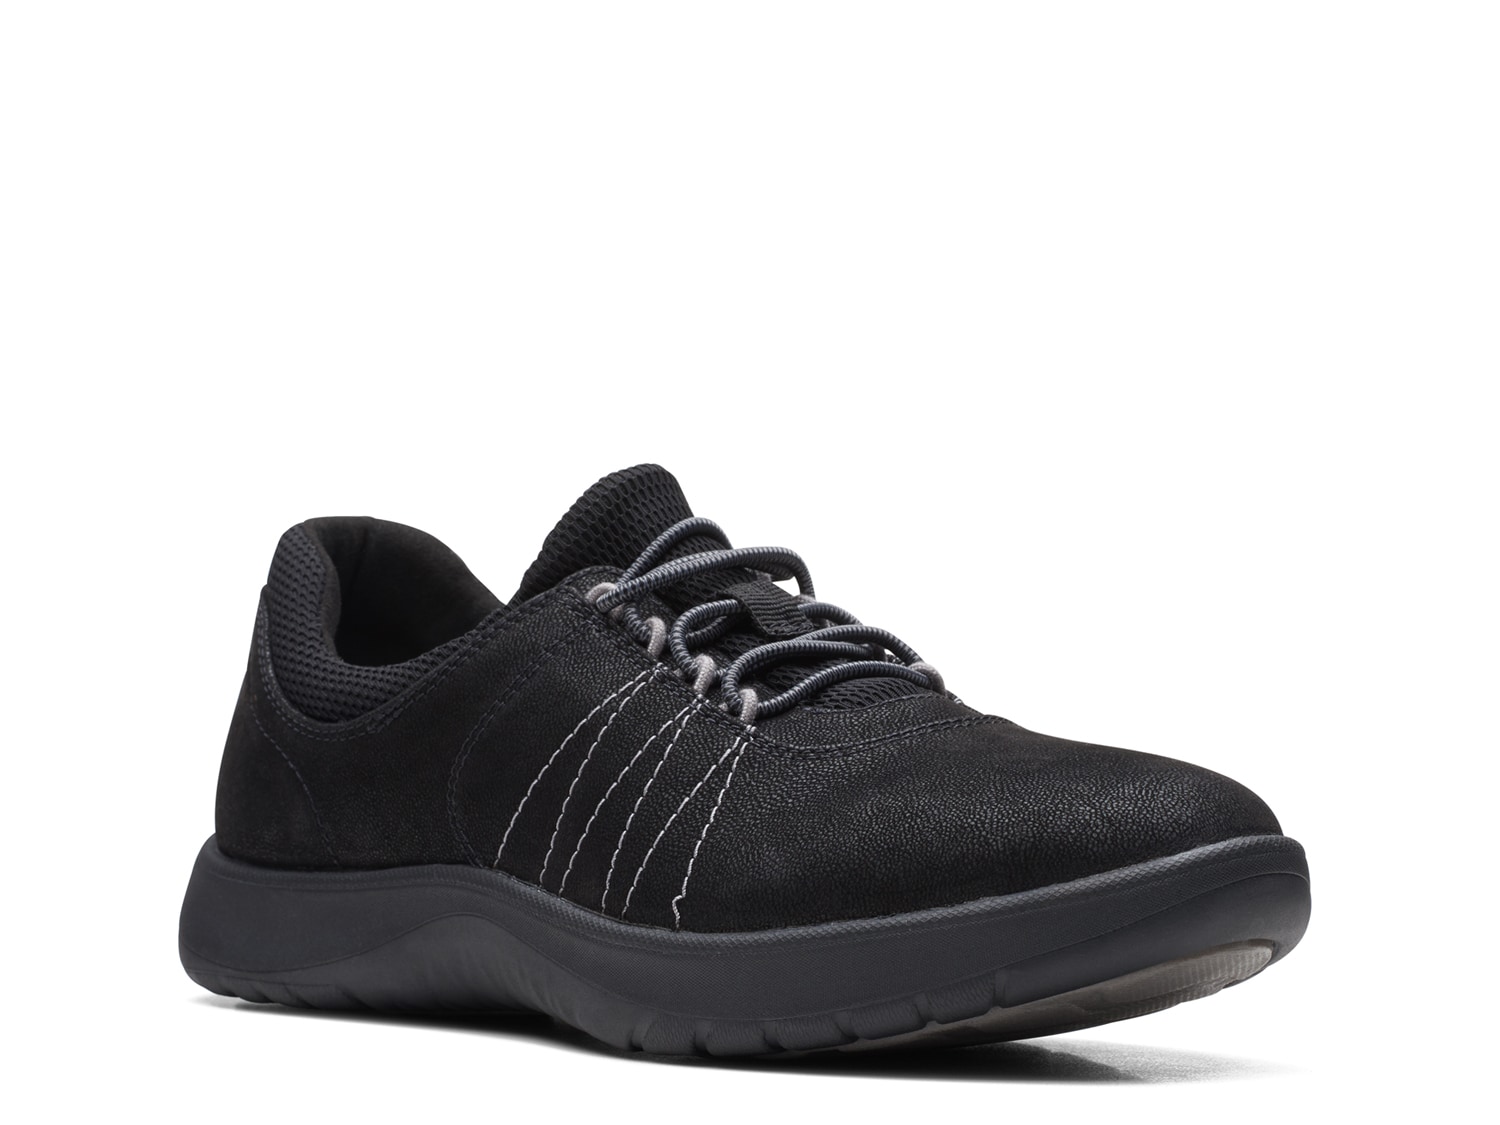 Clarks Cloudsteppers Adella Stroll Sneaker - Free Shipping | DSW